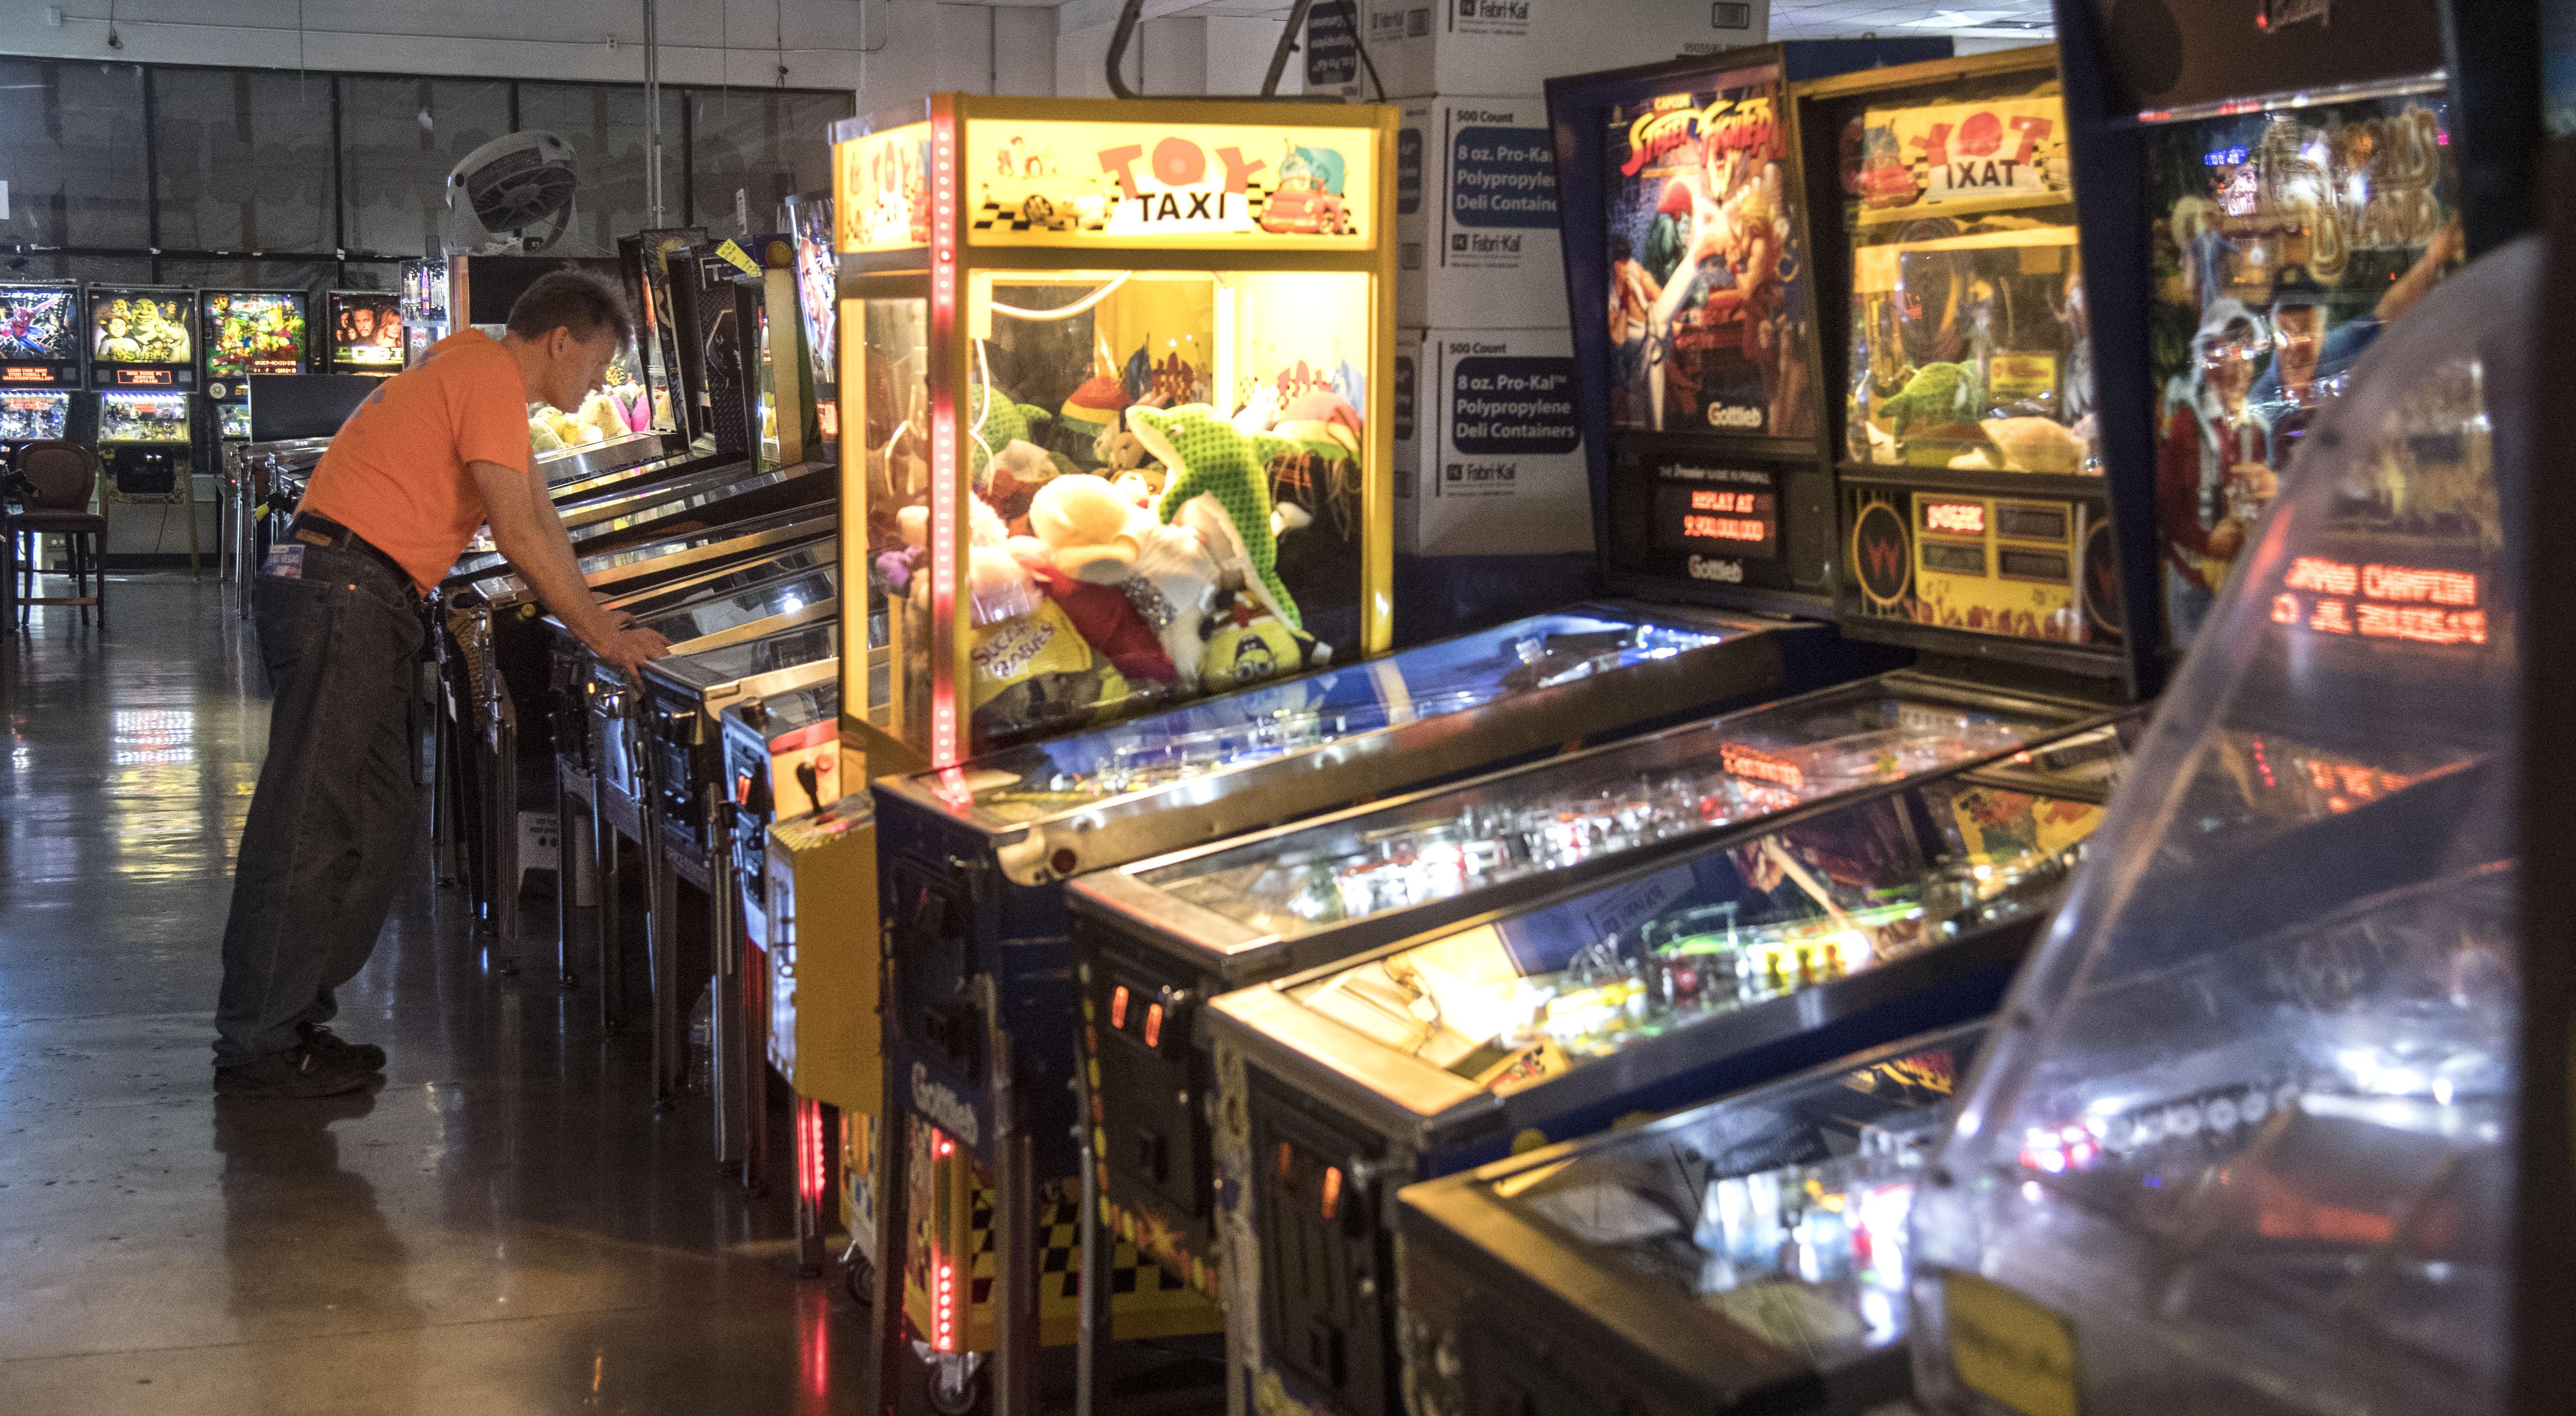 PINBALL HALL OF FAME REVIEW, LAS VEGAS ATTRACTIONS 